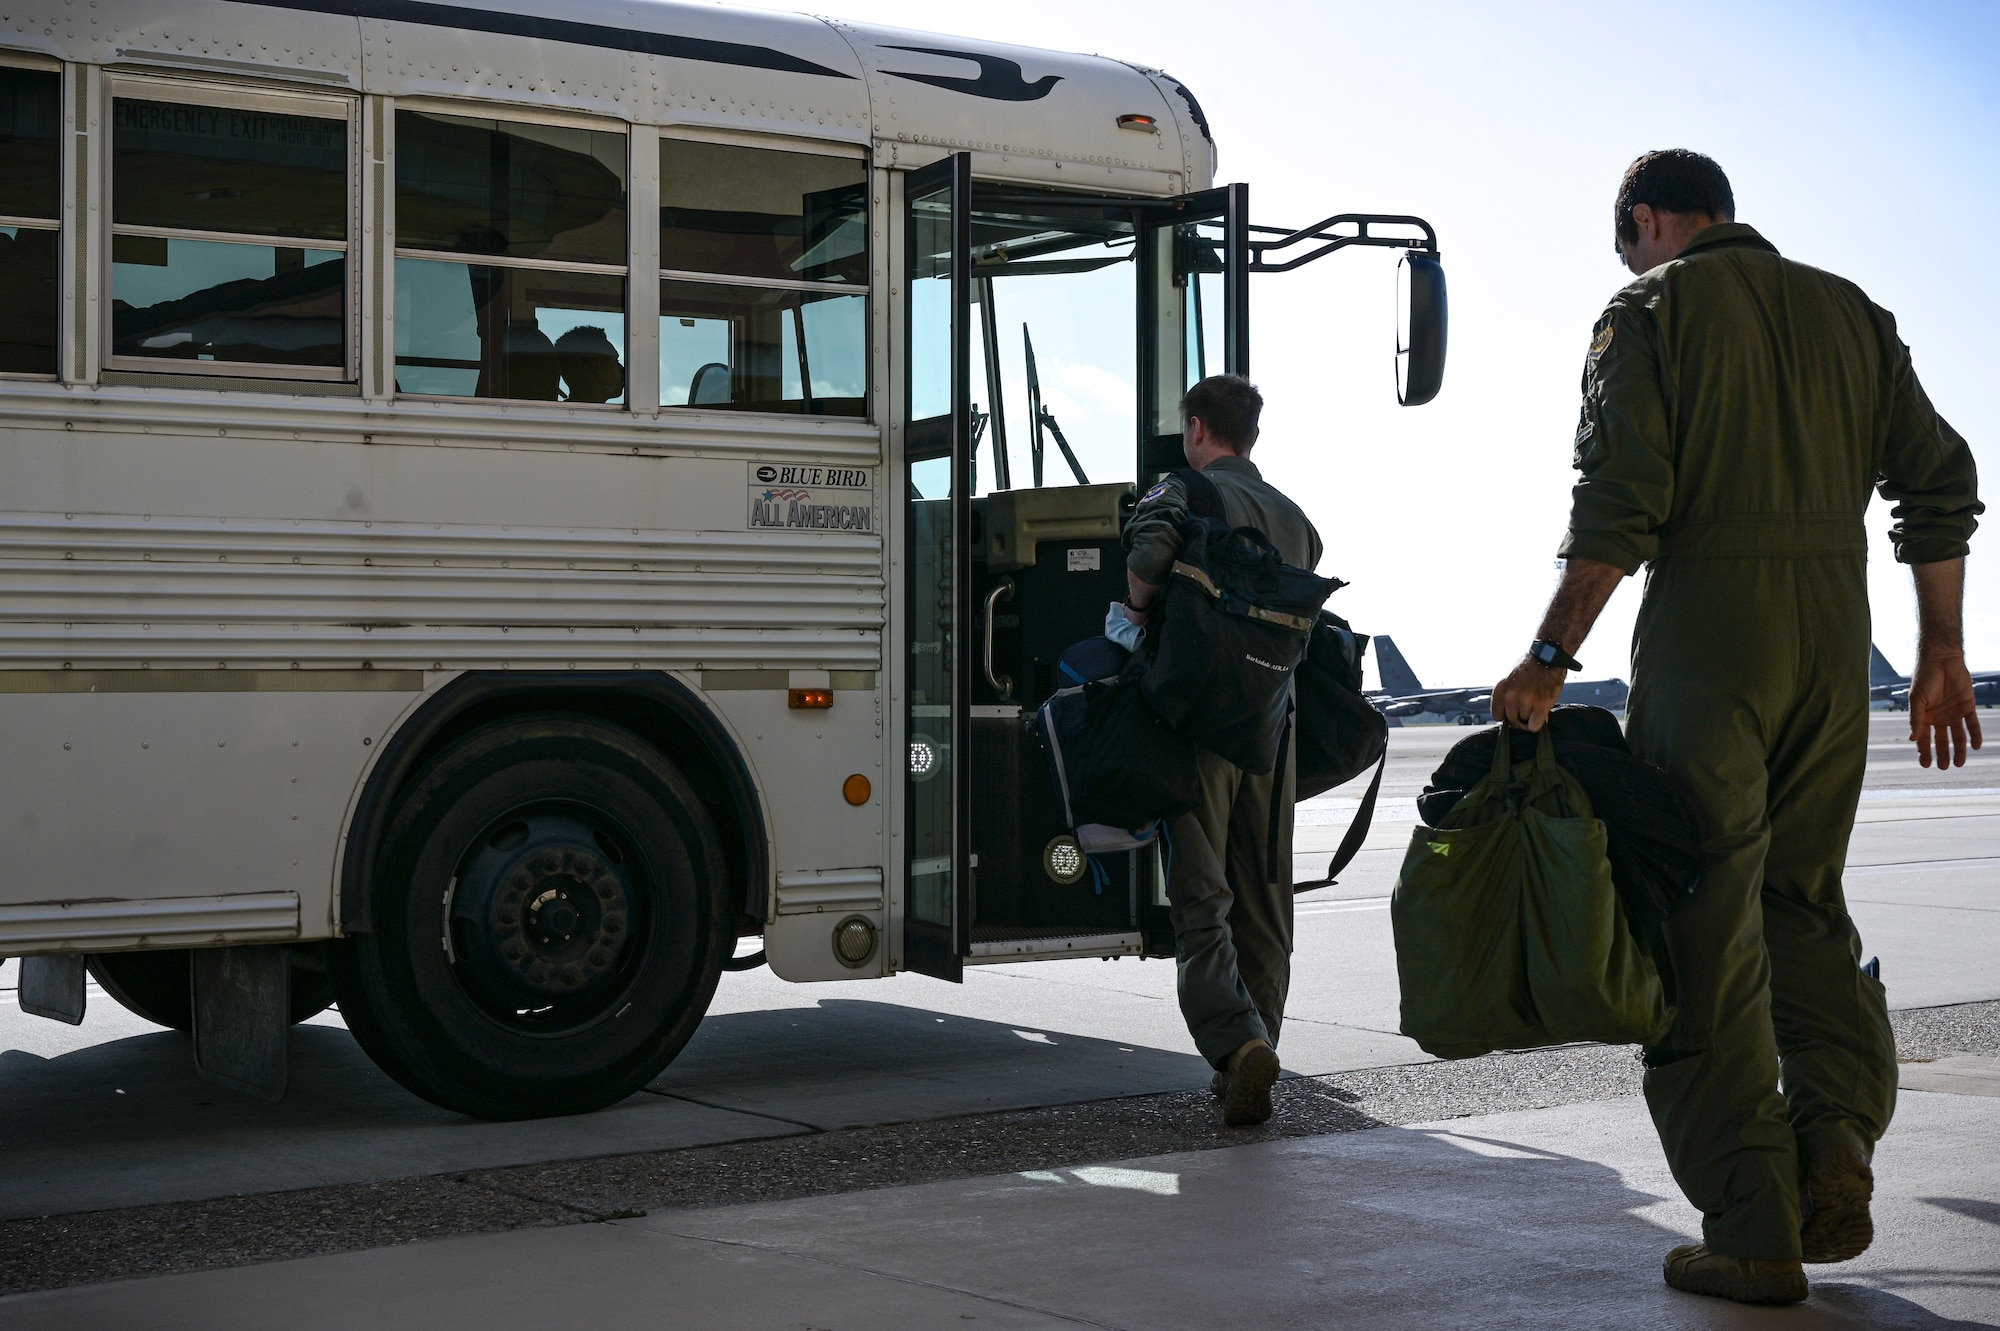 Aircrew from the 20th Bomb Squadron board a ground transportation bus before stepping to a B-52H Stratofortress in support of RIMPAC 2022 at Barksdale Air Force Base, Aug. 1, 2022. Twenty-six nations, 38 ships, three submarines, more than 170 aircraft and 25,000 personnel are participating in RIMPAC from June 29 to Aug. 4 in and around the Hawaiian Islands and Southern California. The world’s largest international maritime exercise, RIMPAC provides a unique training opportunity while fostering and sustaining cooperative relationships among participants critical to ensuring the safety of sea lanes and security on the world’s oceans. RIMPAC 2022 is the 28th exercise in the series that began in 1971. (U.S. Air Force photo by Senior Airman Jonathan E. Ramos)